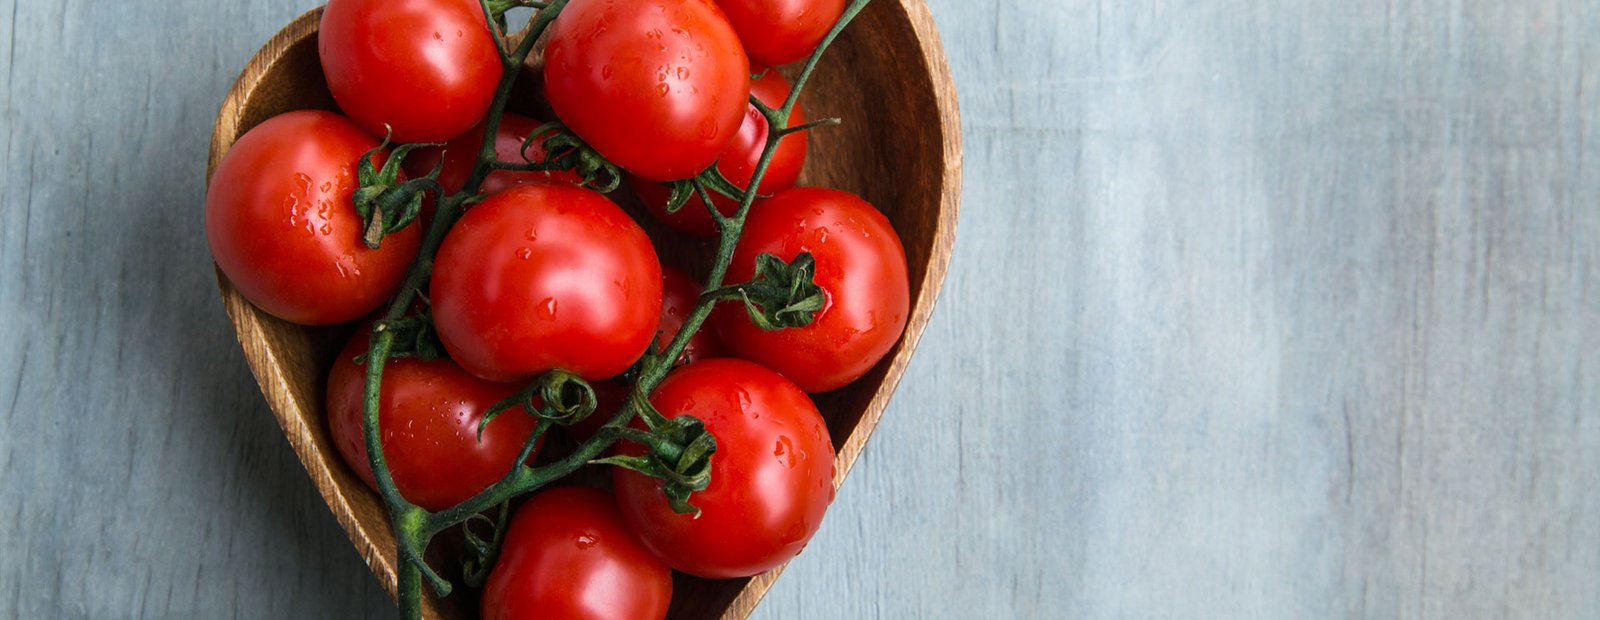 Raw, cooked or in pills, tomato has heart